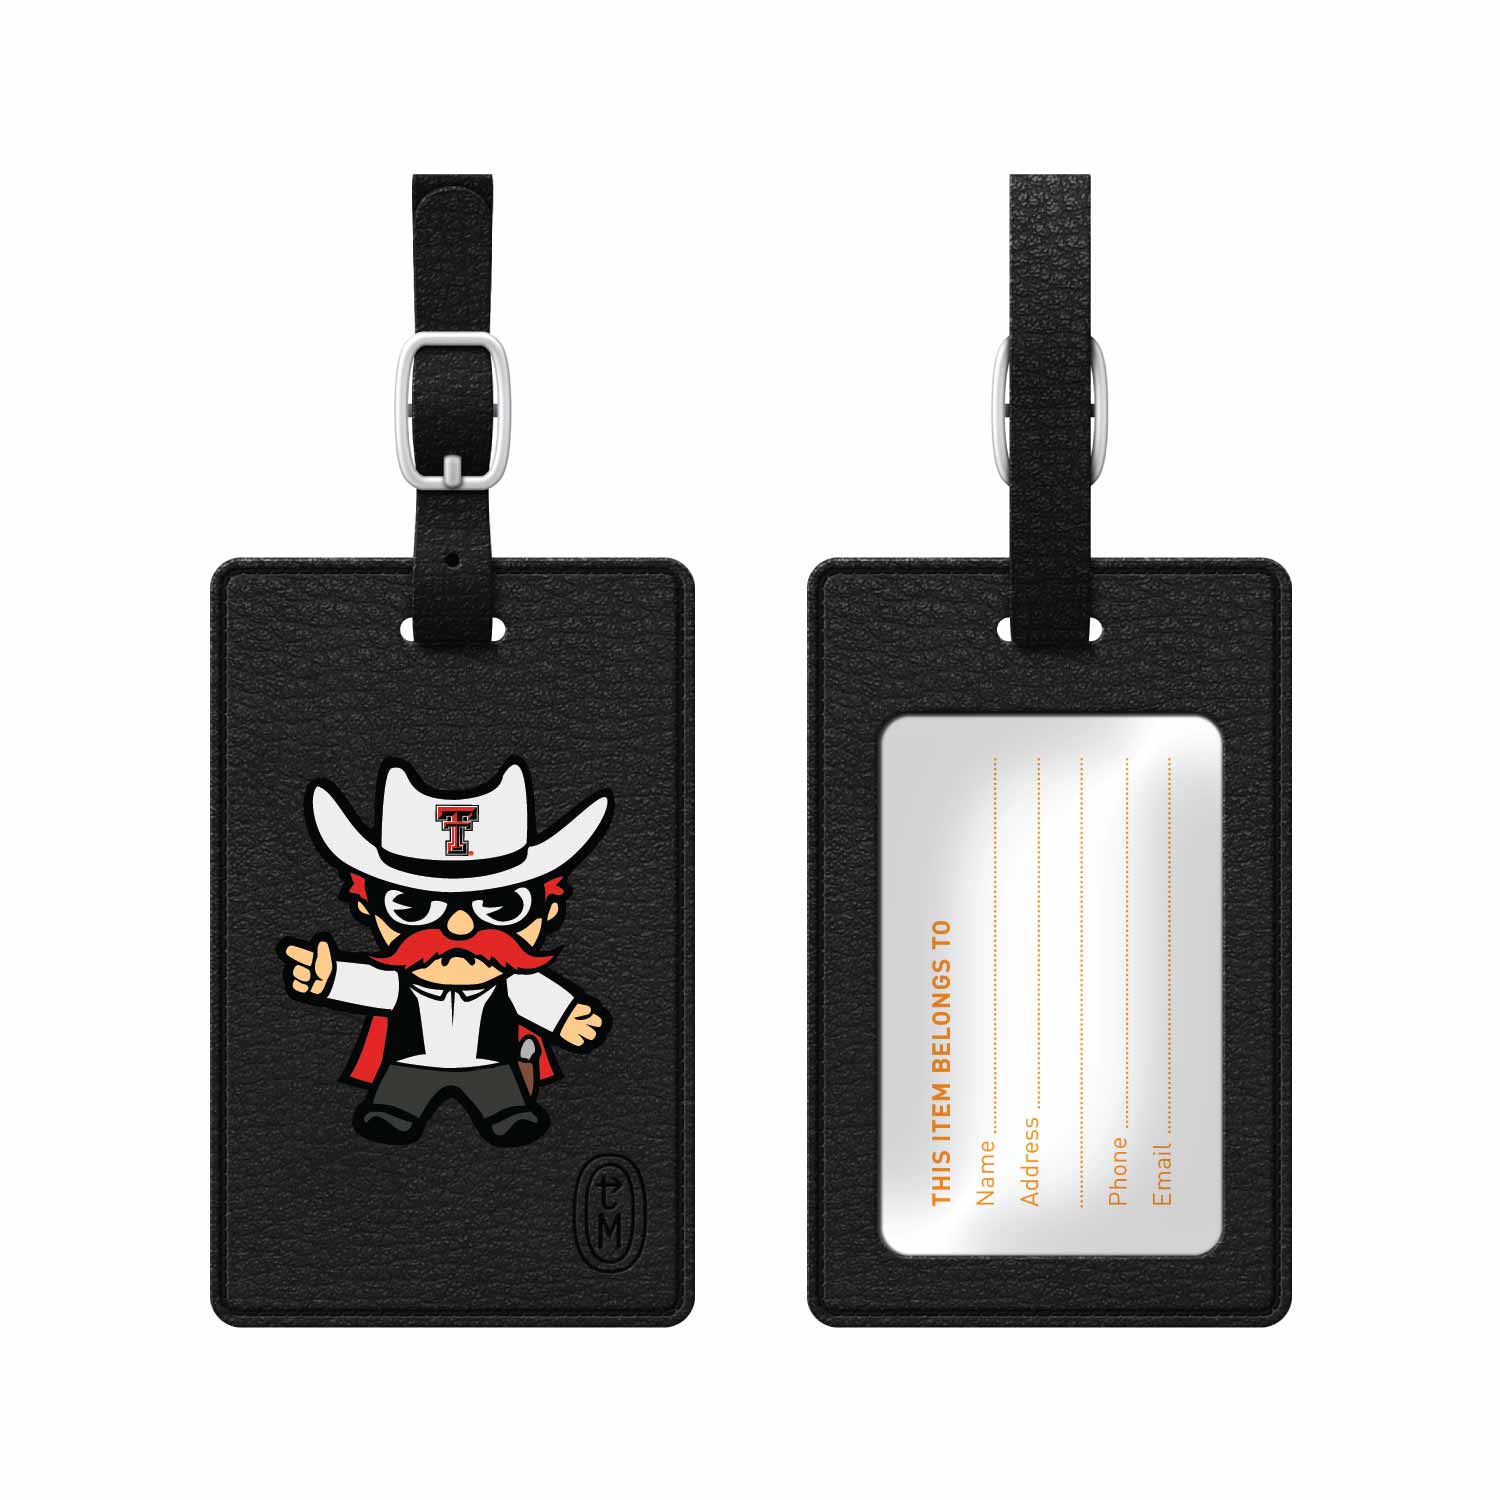 Texas Tech University Faux Leather Luggage Tag, Tokyodachi Classic